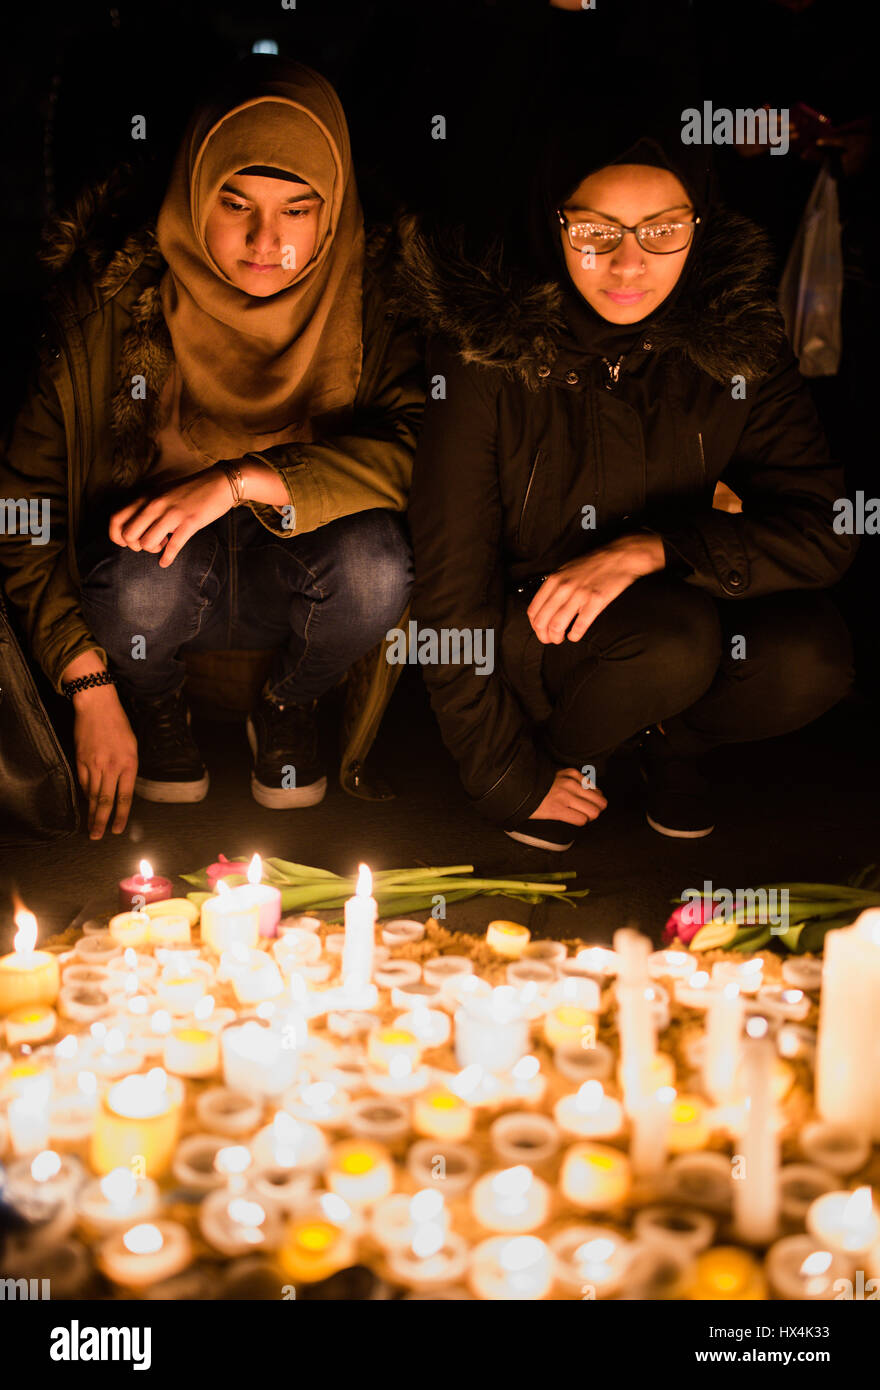 London, UK. 23rd Mar, 2017. Two women light candles in Trafalgar Square, following a vigil to remember the victims of the Westminster terror attack. A crowd of hundreds gathered in the square, lighting candles and listening to speeches. Credit: Jacob Sacks-Jones/Alamy Live News. Stock Photo